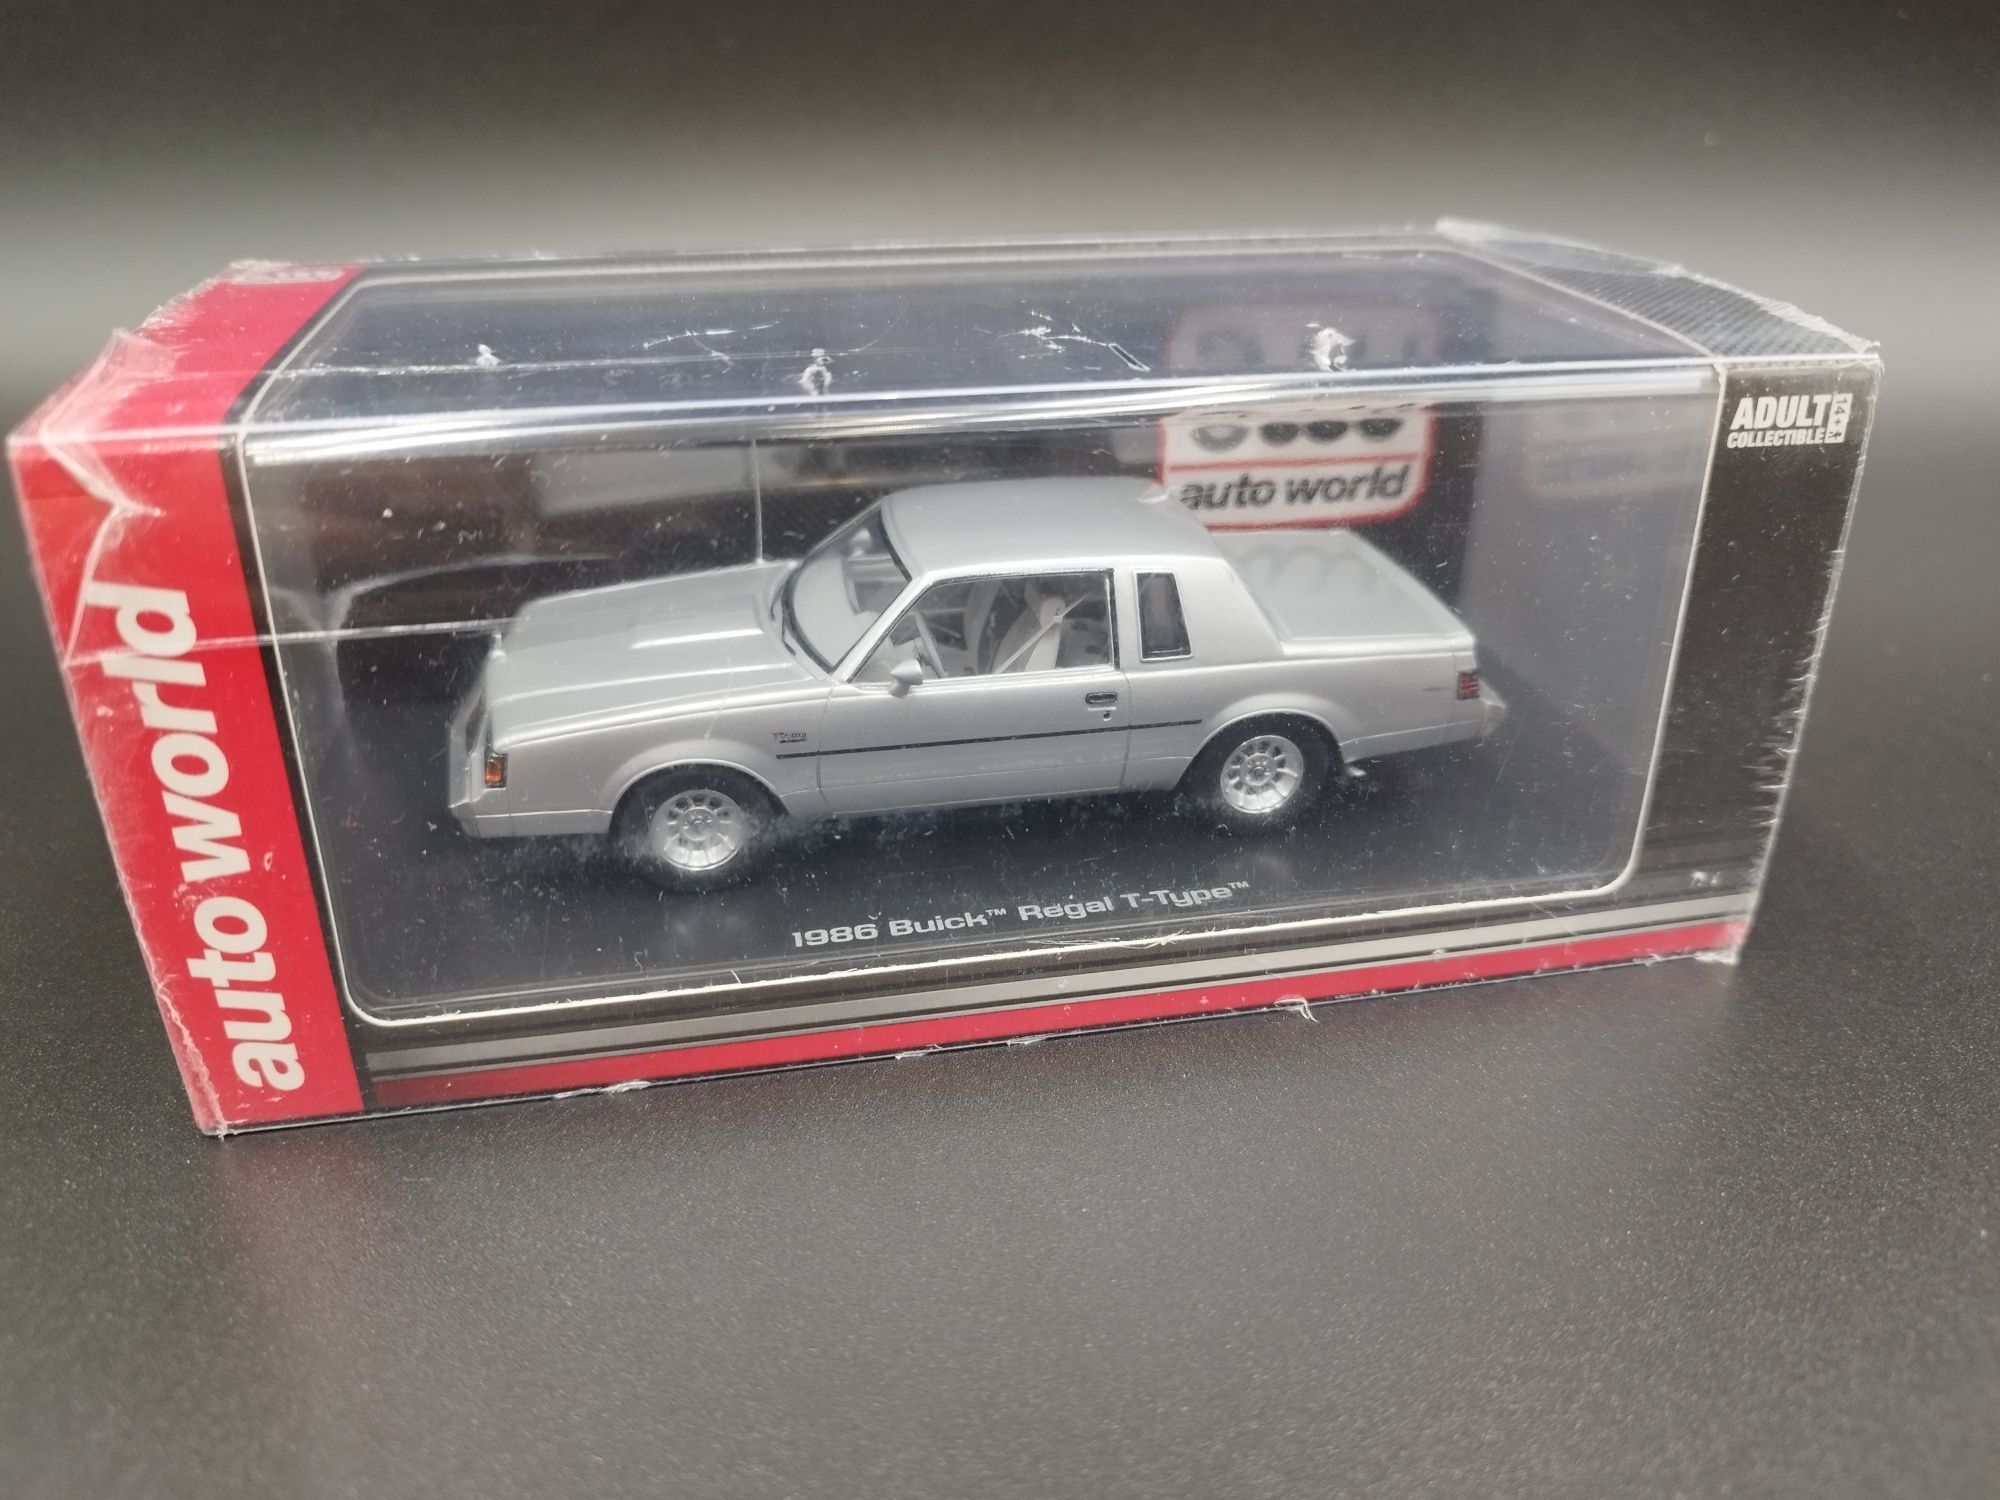 1:43 Auto Word Buick Regal Typ T (1986) silver  model